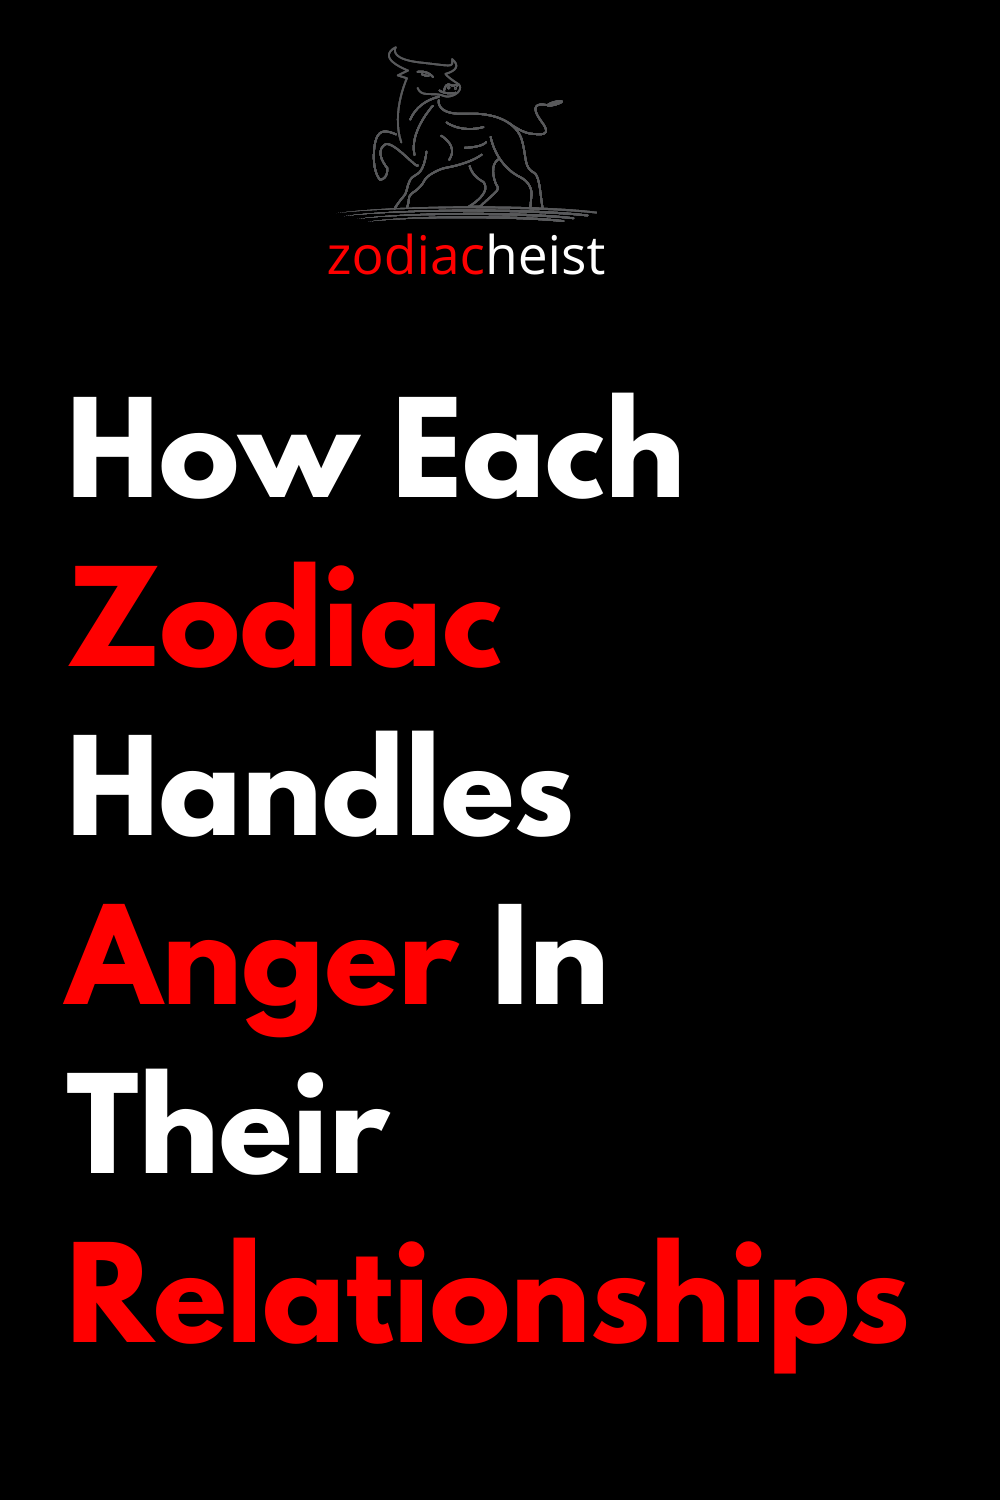 How Each Zodiac Handles Anger In Their Relationships